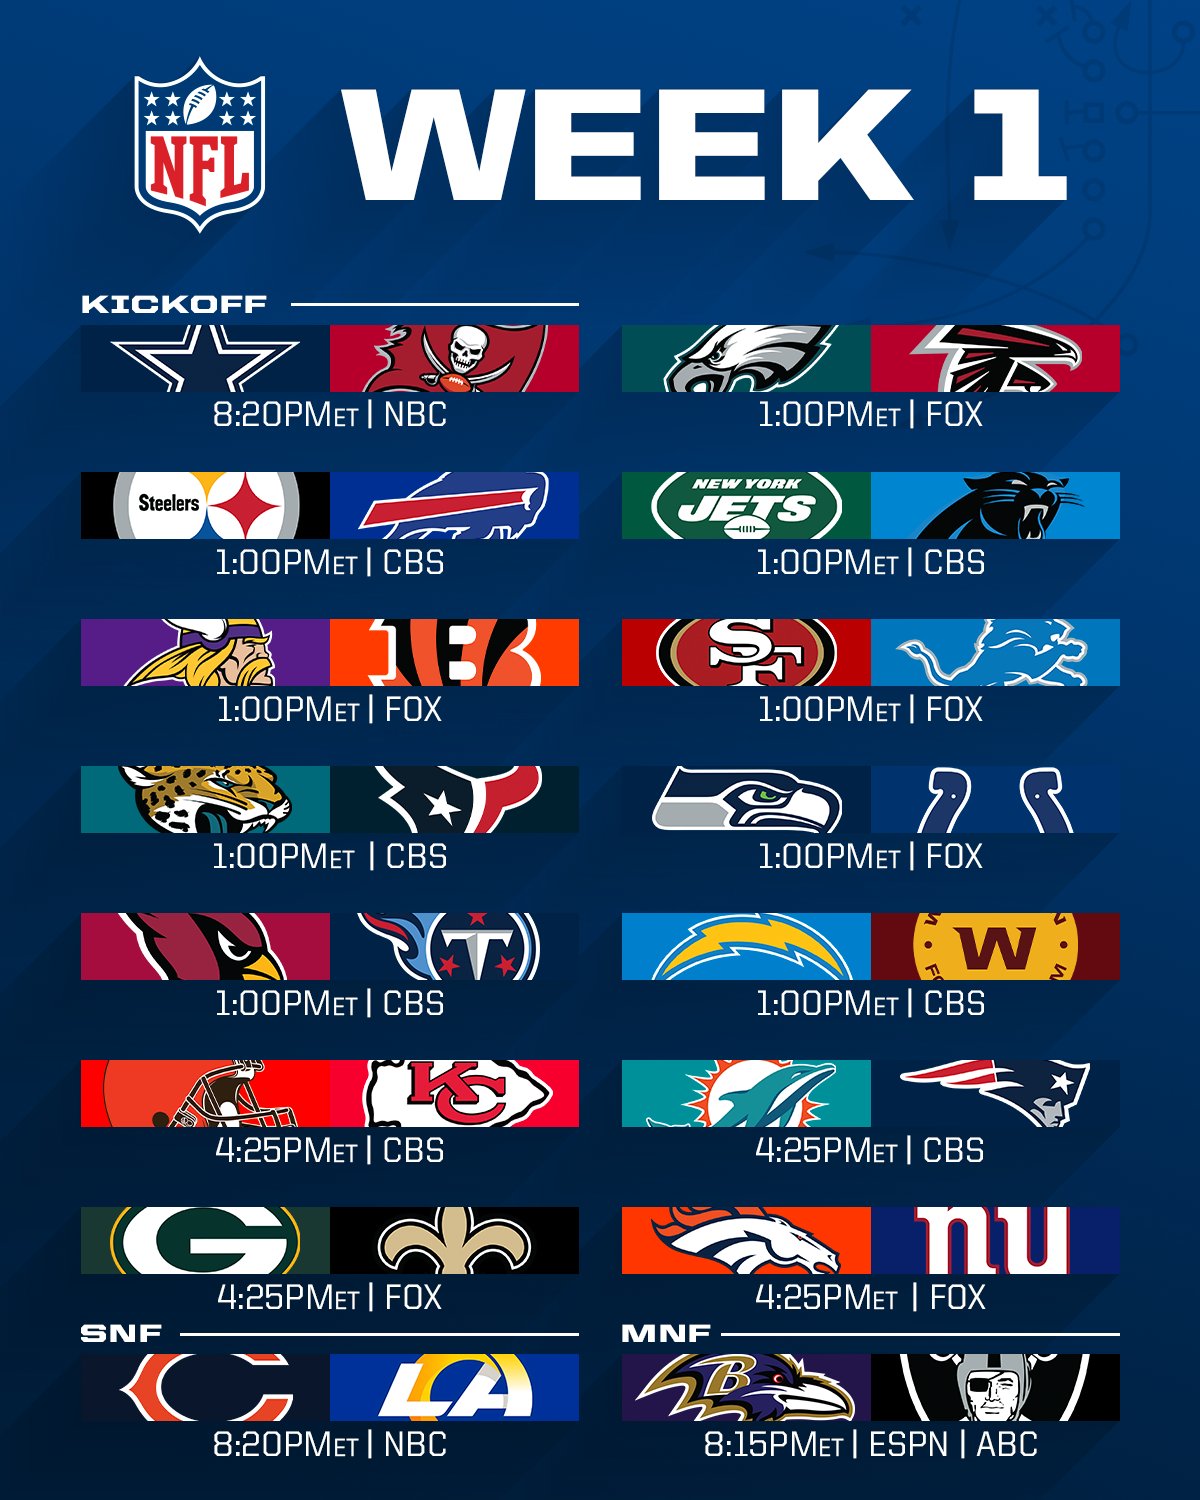 point spreads for nfl games this week